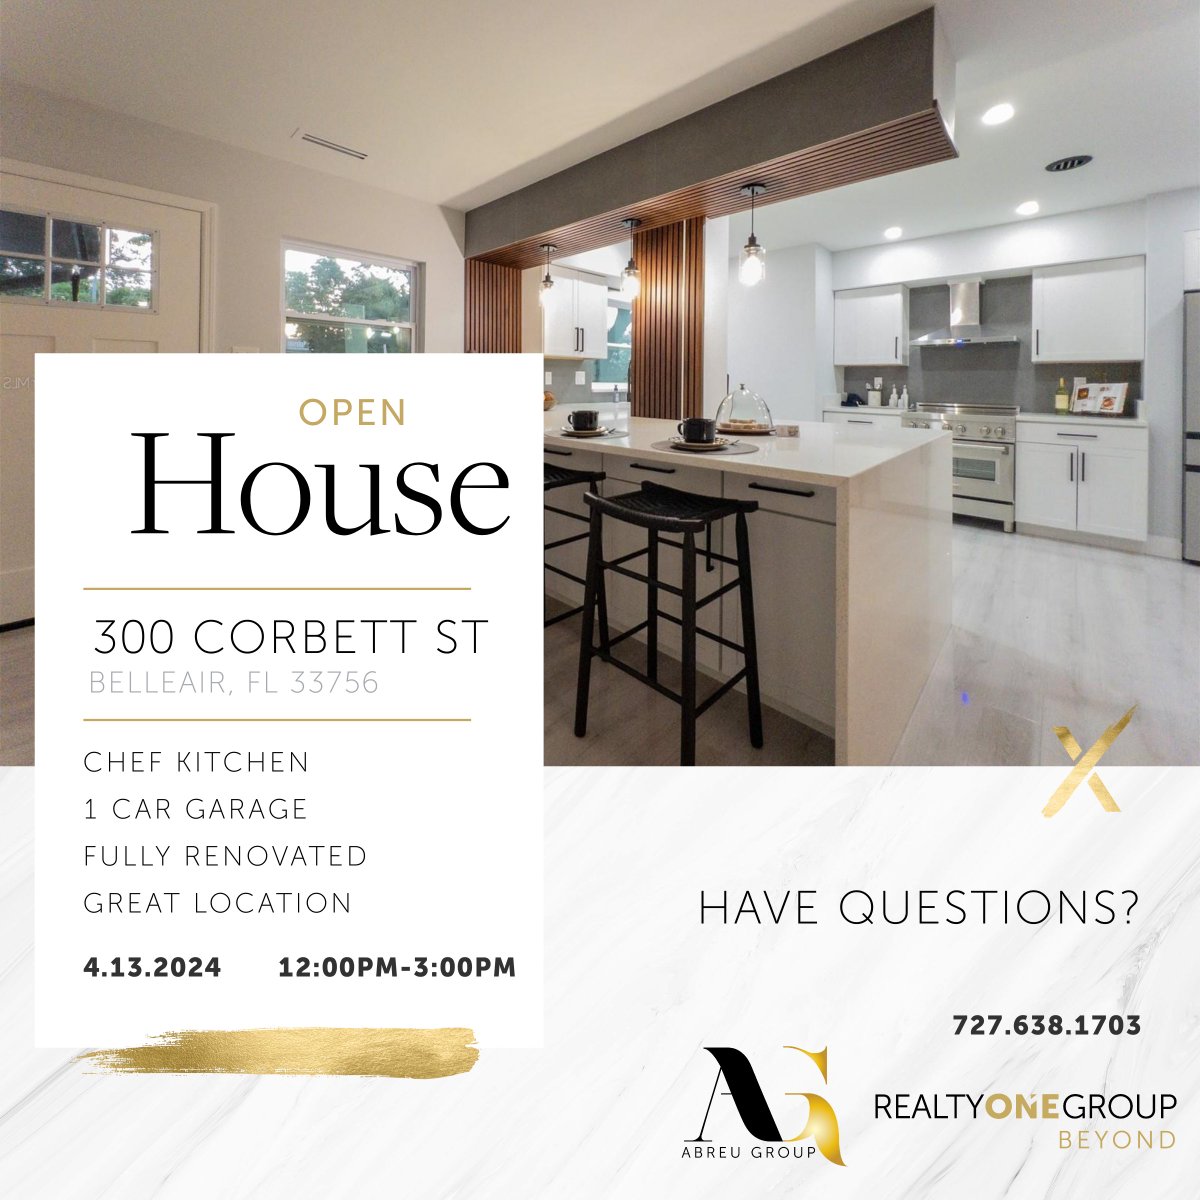 Your dream home awaits! Join us on March 13th from 12-3pm for a special open house in Belleair. 🏡✨ Step inside and experience luxury living at its finest. Contact the Abreu Group to turn your real estate dreams into reality! 📞 

#OpenHouse #LuxuryLiving #AbreuGroup